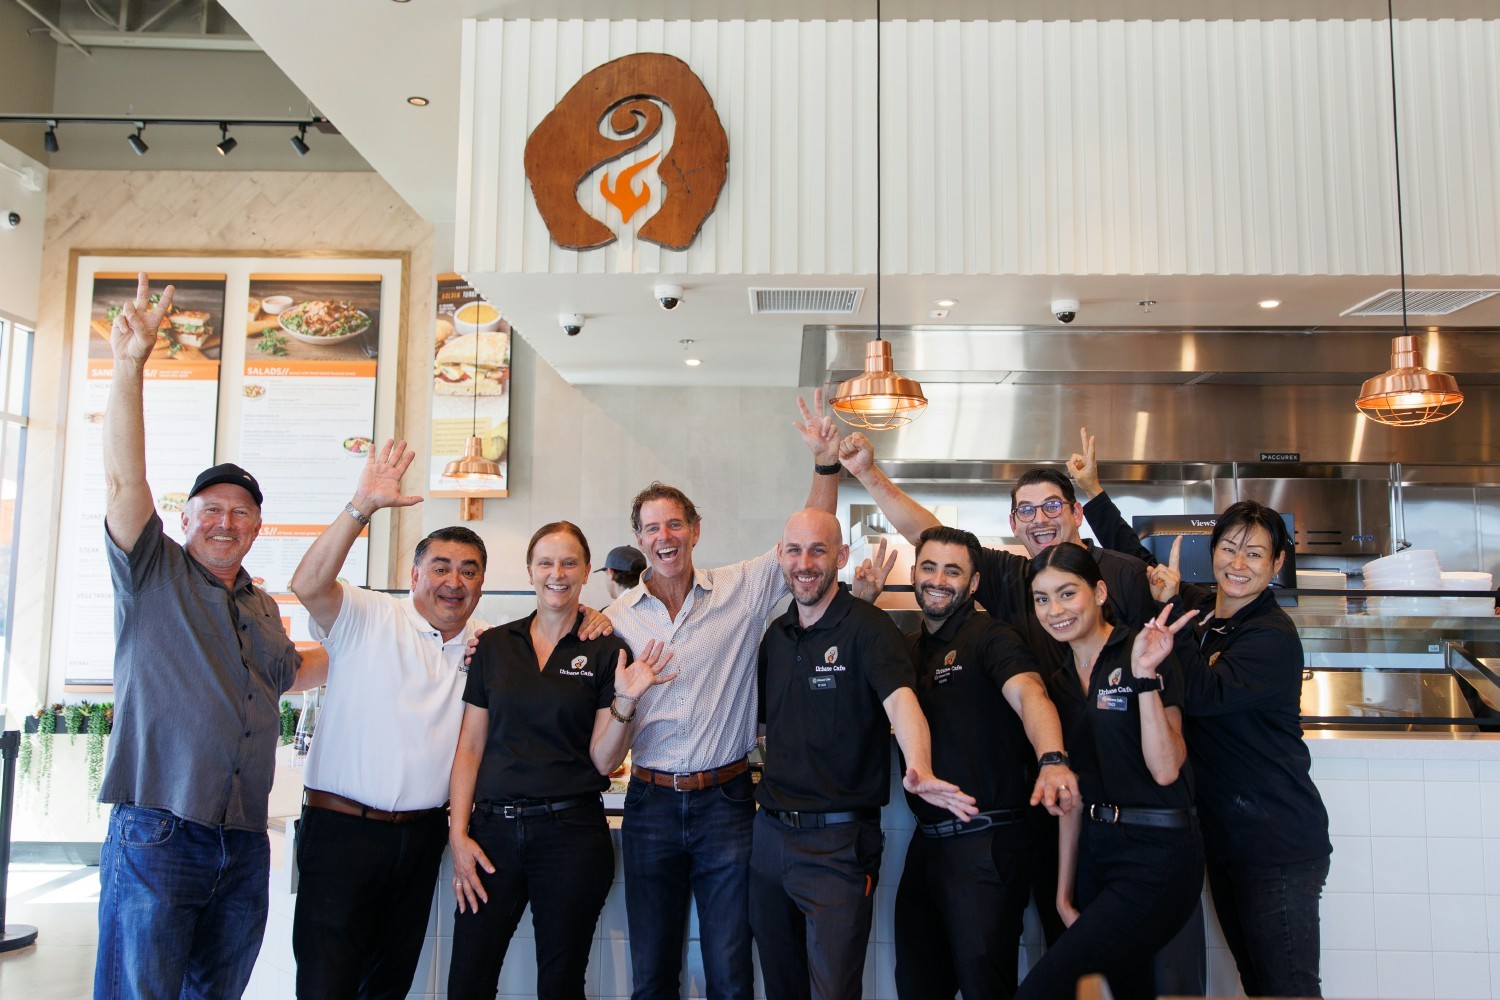 Get fired up! CEO Tom at a new restaurant opening